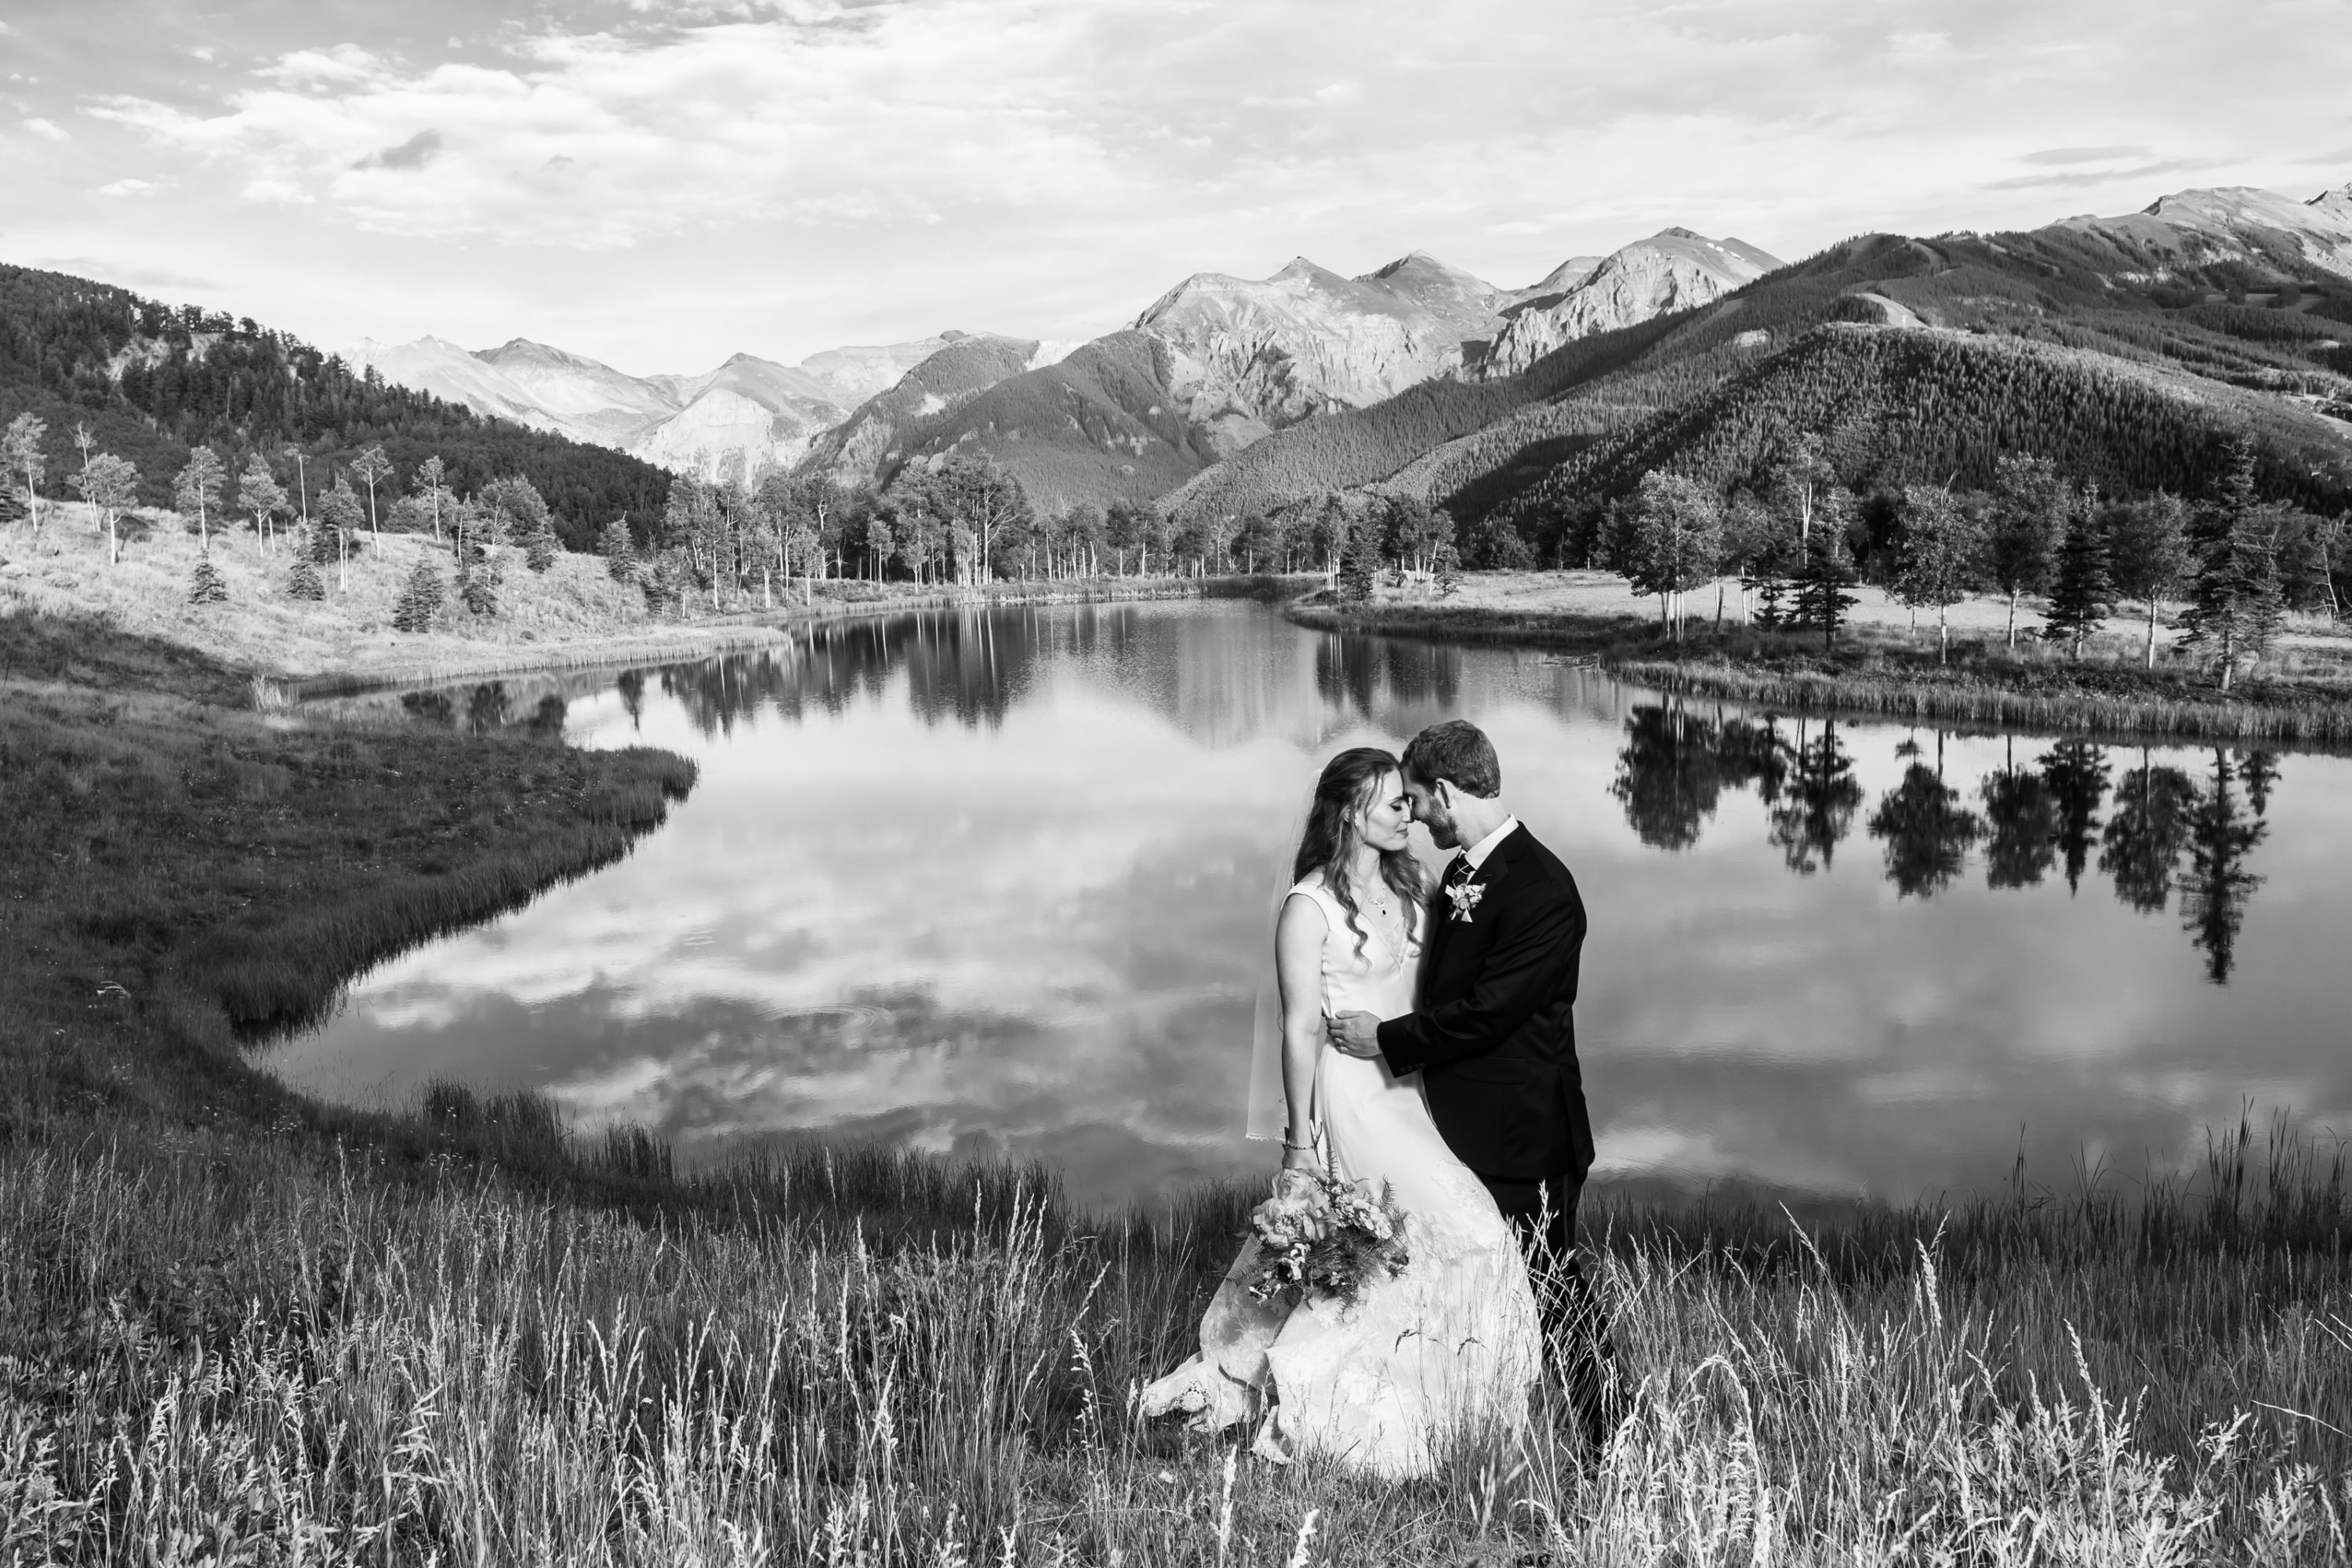 The bride and groom embrace during their Telluride, Colorado, wedding.